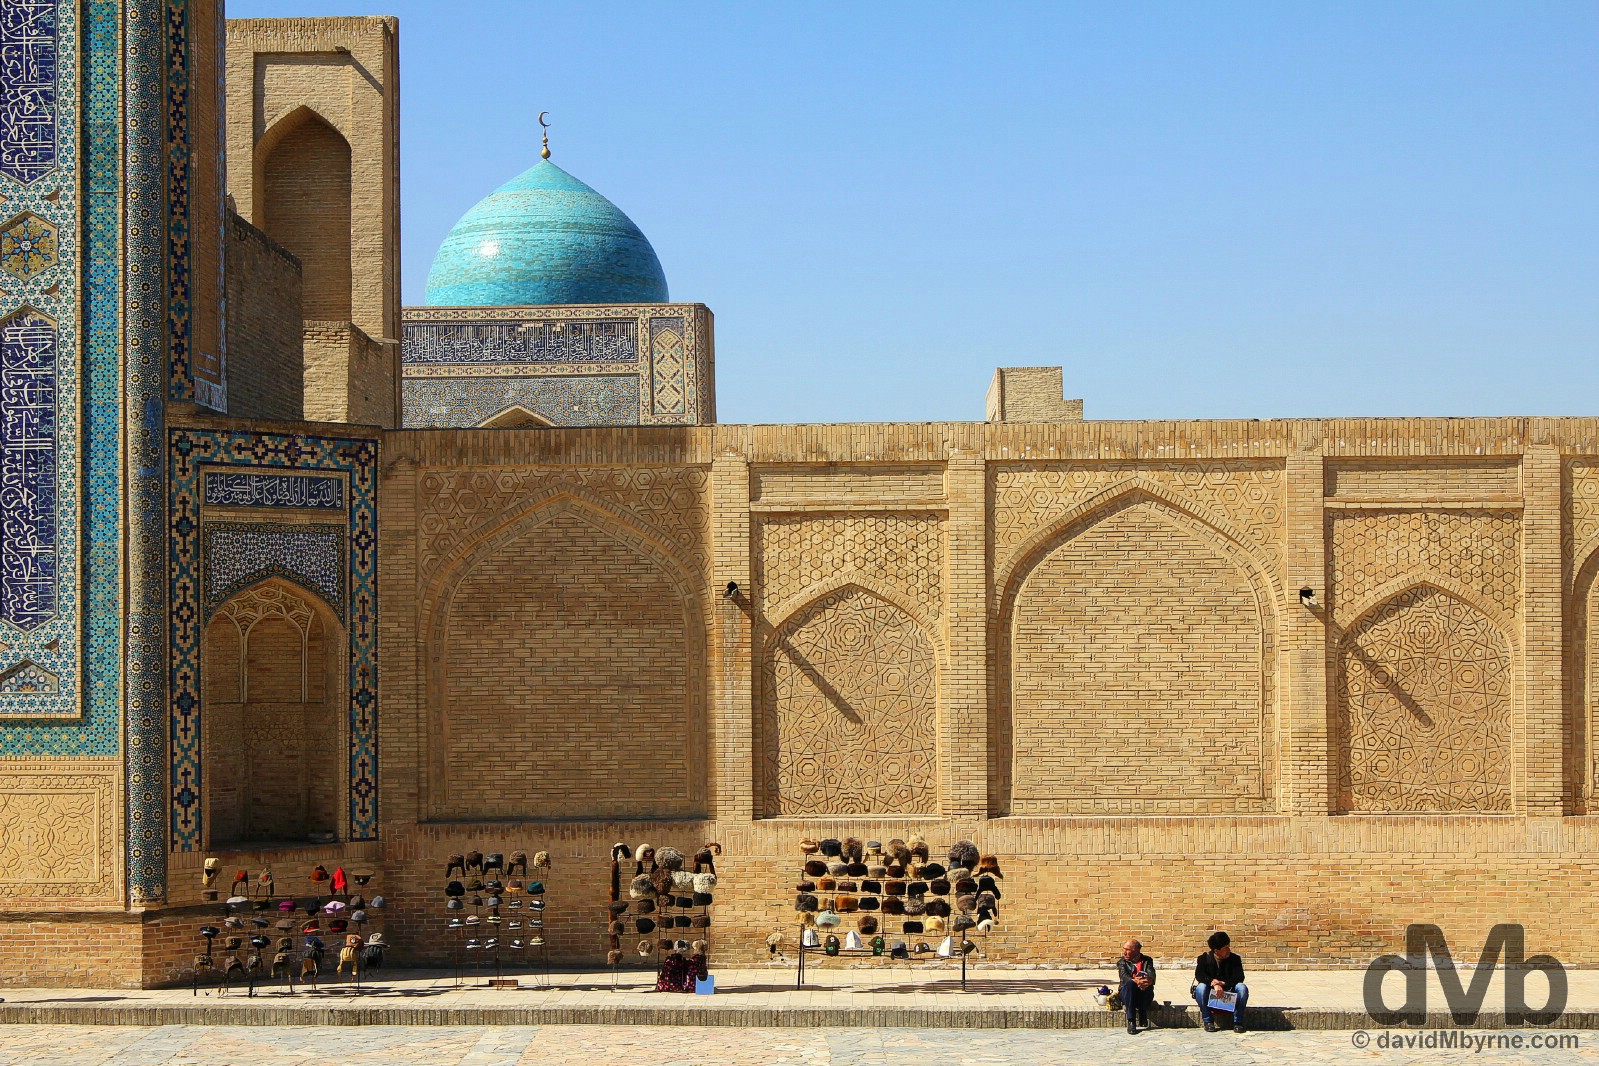 Sitting by the walls of the Kalon Mosque as seen from the Mir-i-Arab Medressa in Bukhara, Uzbekistan. March 12, 2015.